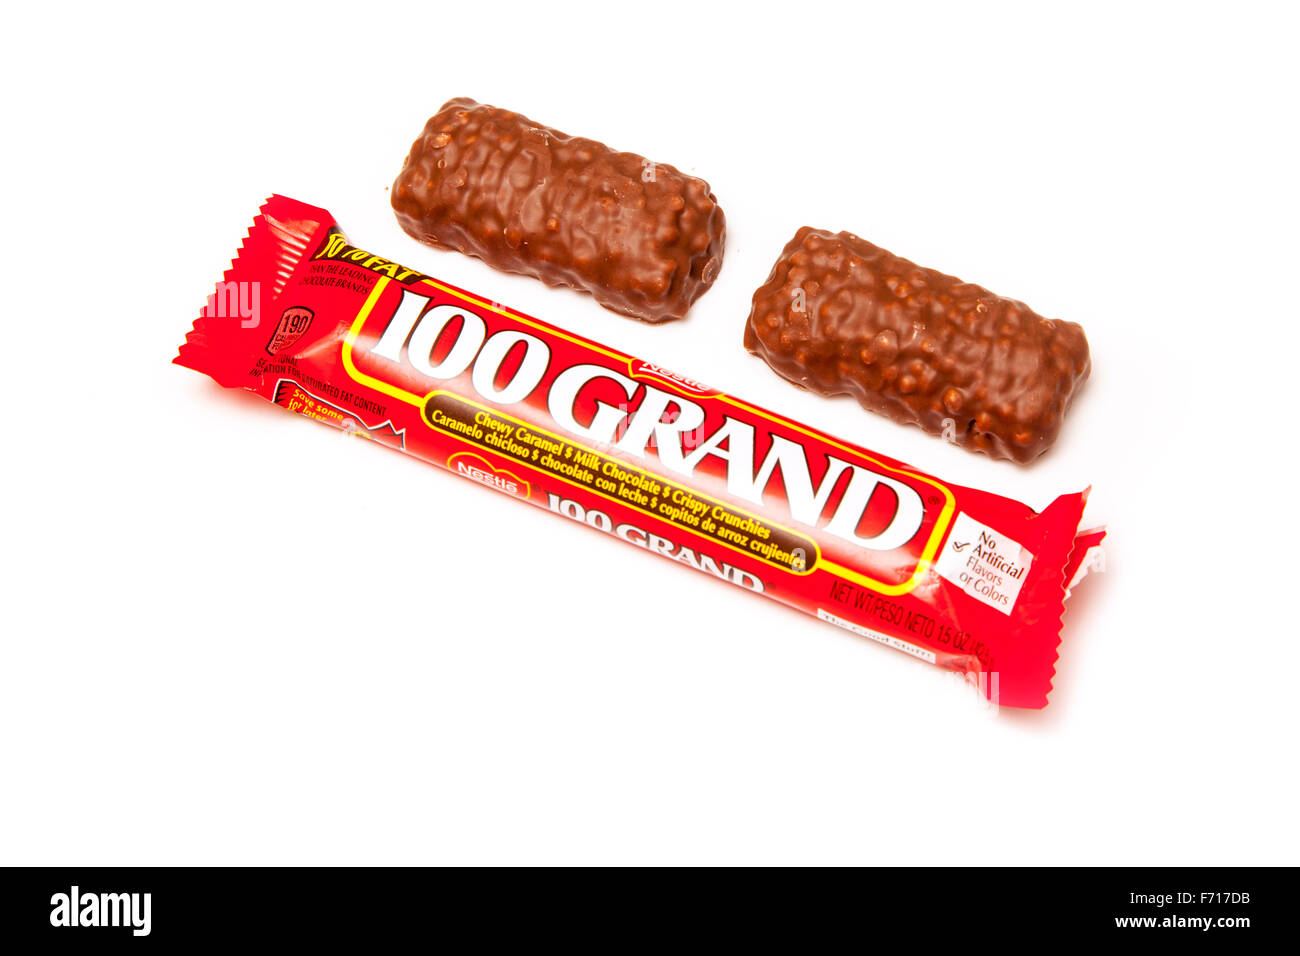 American candy a 100 Grand Bar, a chocolate bar made by Nestlé. Isolated on a white studio background. Stock Photo